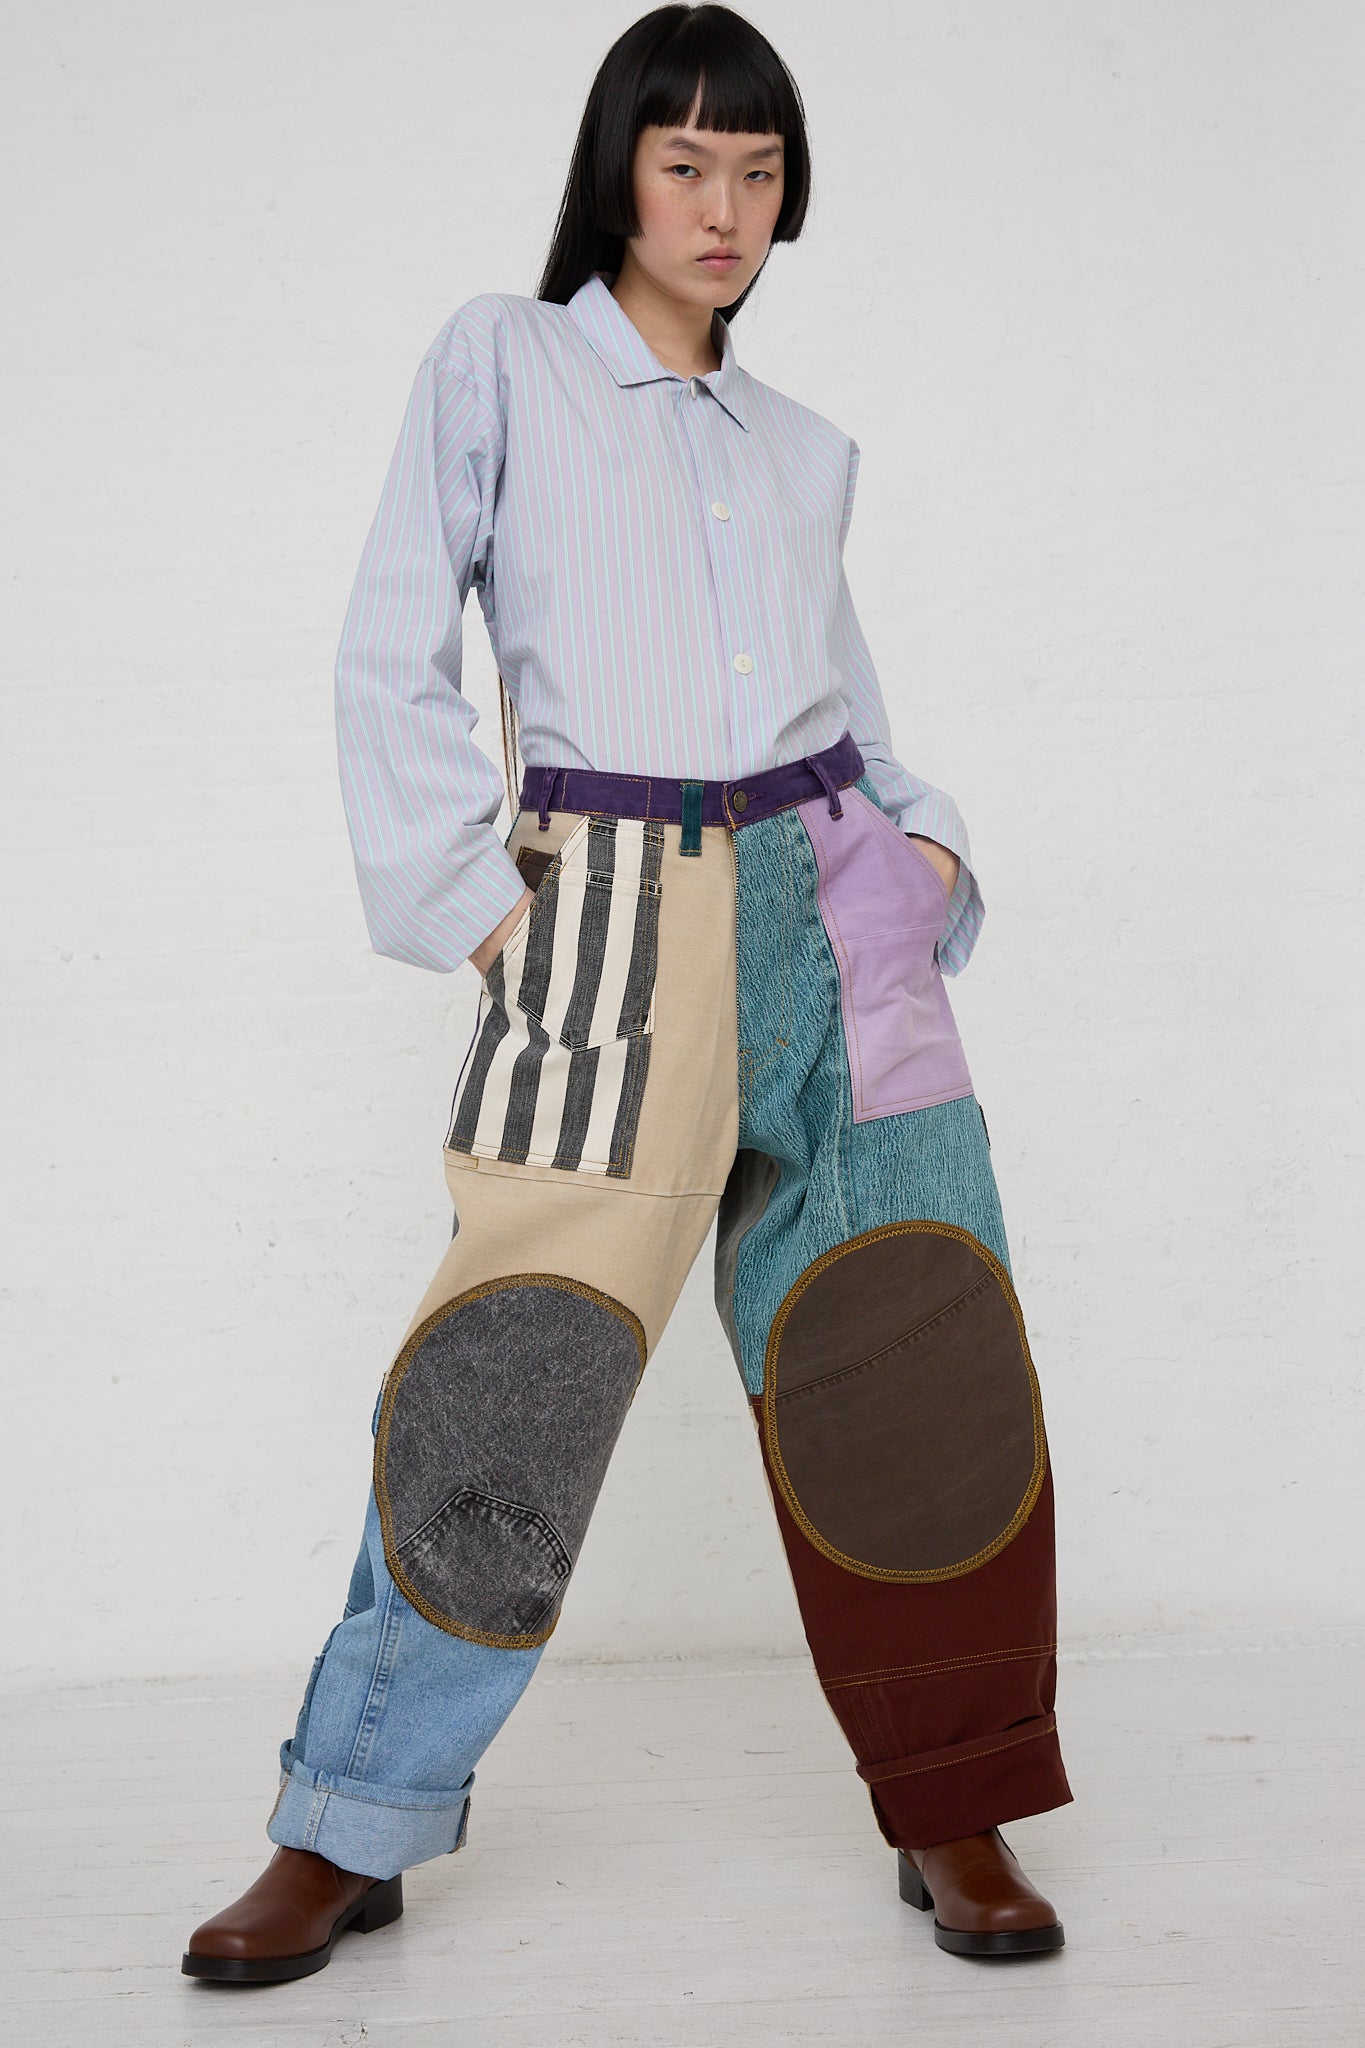 A woman wearing WildRootz handmade Reworked Jeans in Multicolor II and a striped shirt.